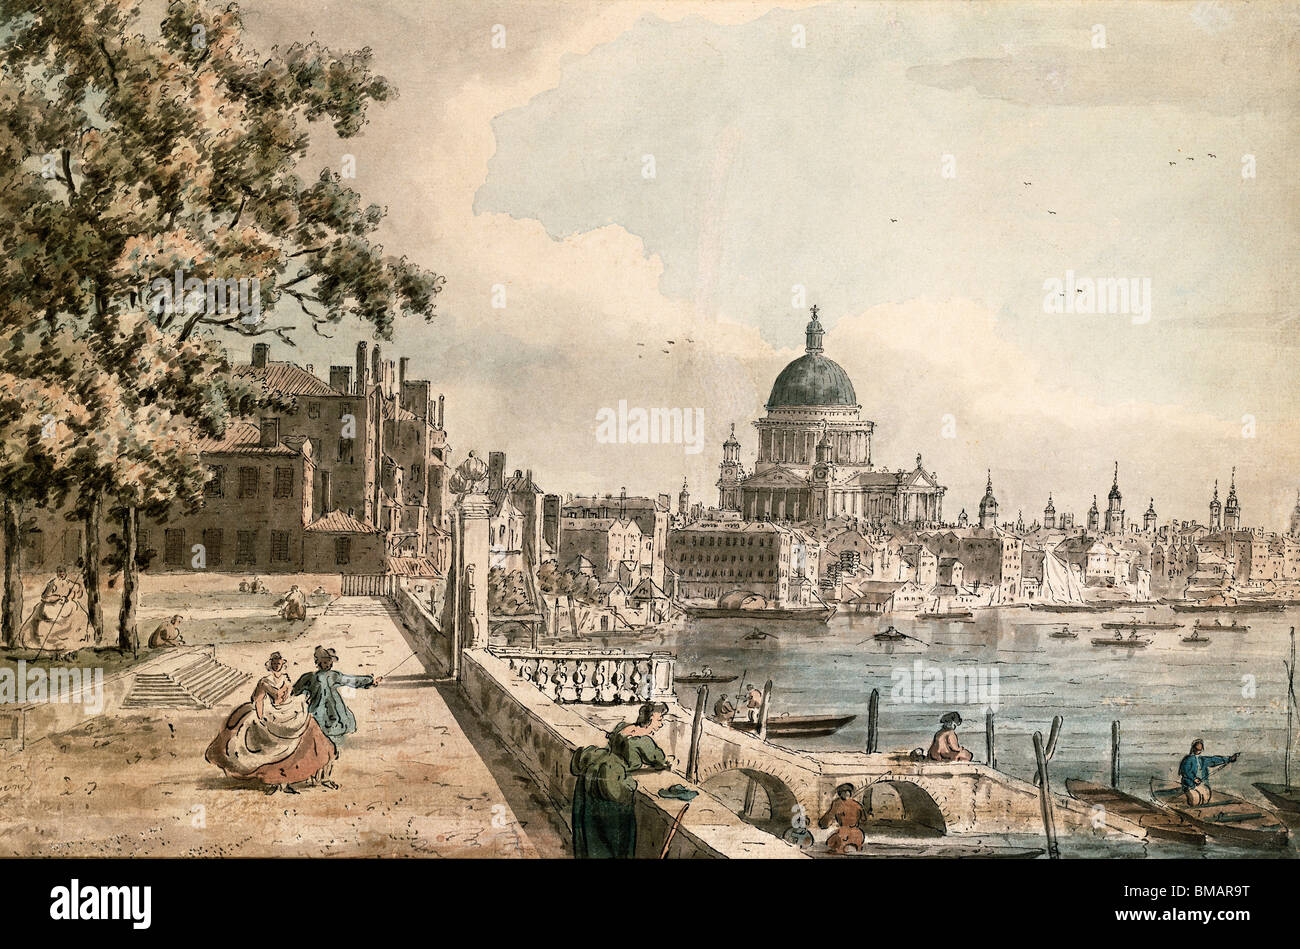 St Paul's Cathedral from the terrace of Old Somerset House, by William James. England, 18th century Stock Photo